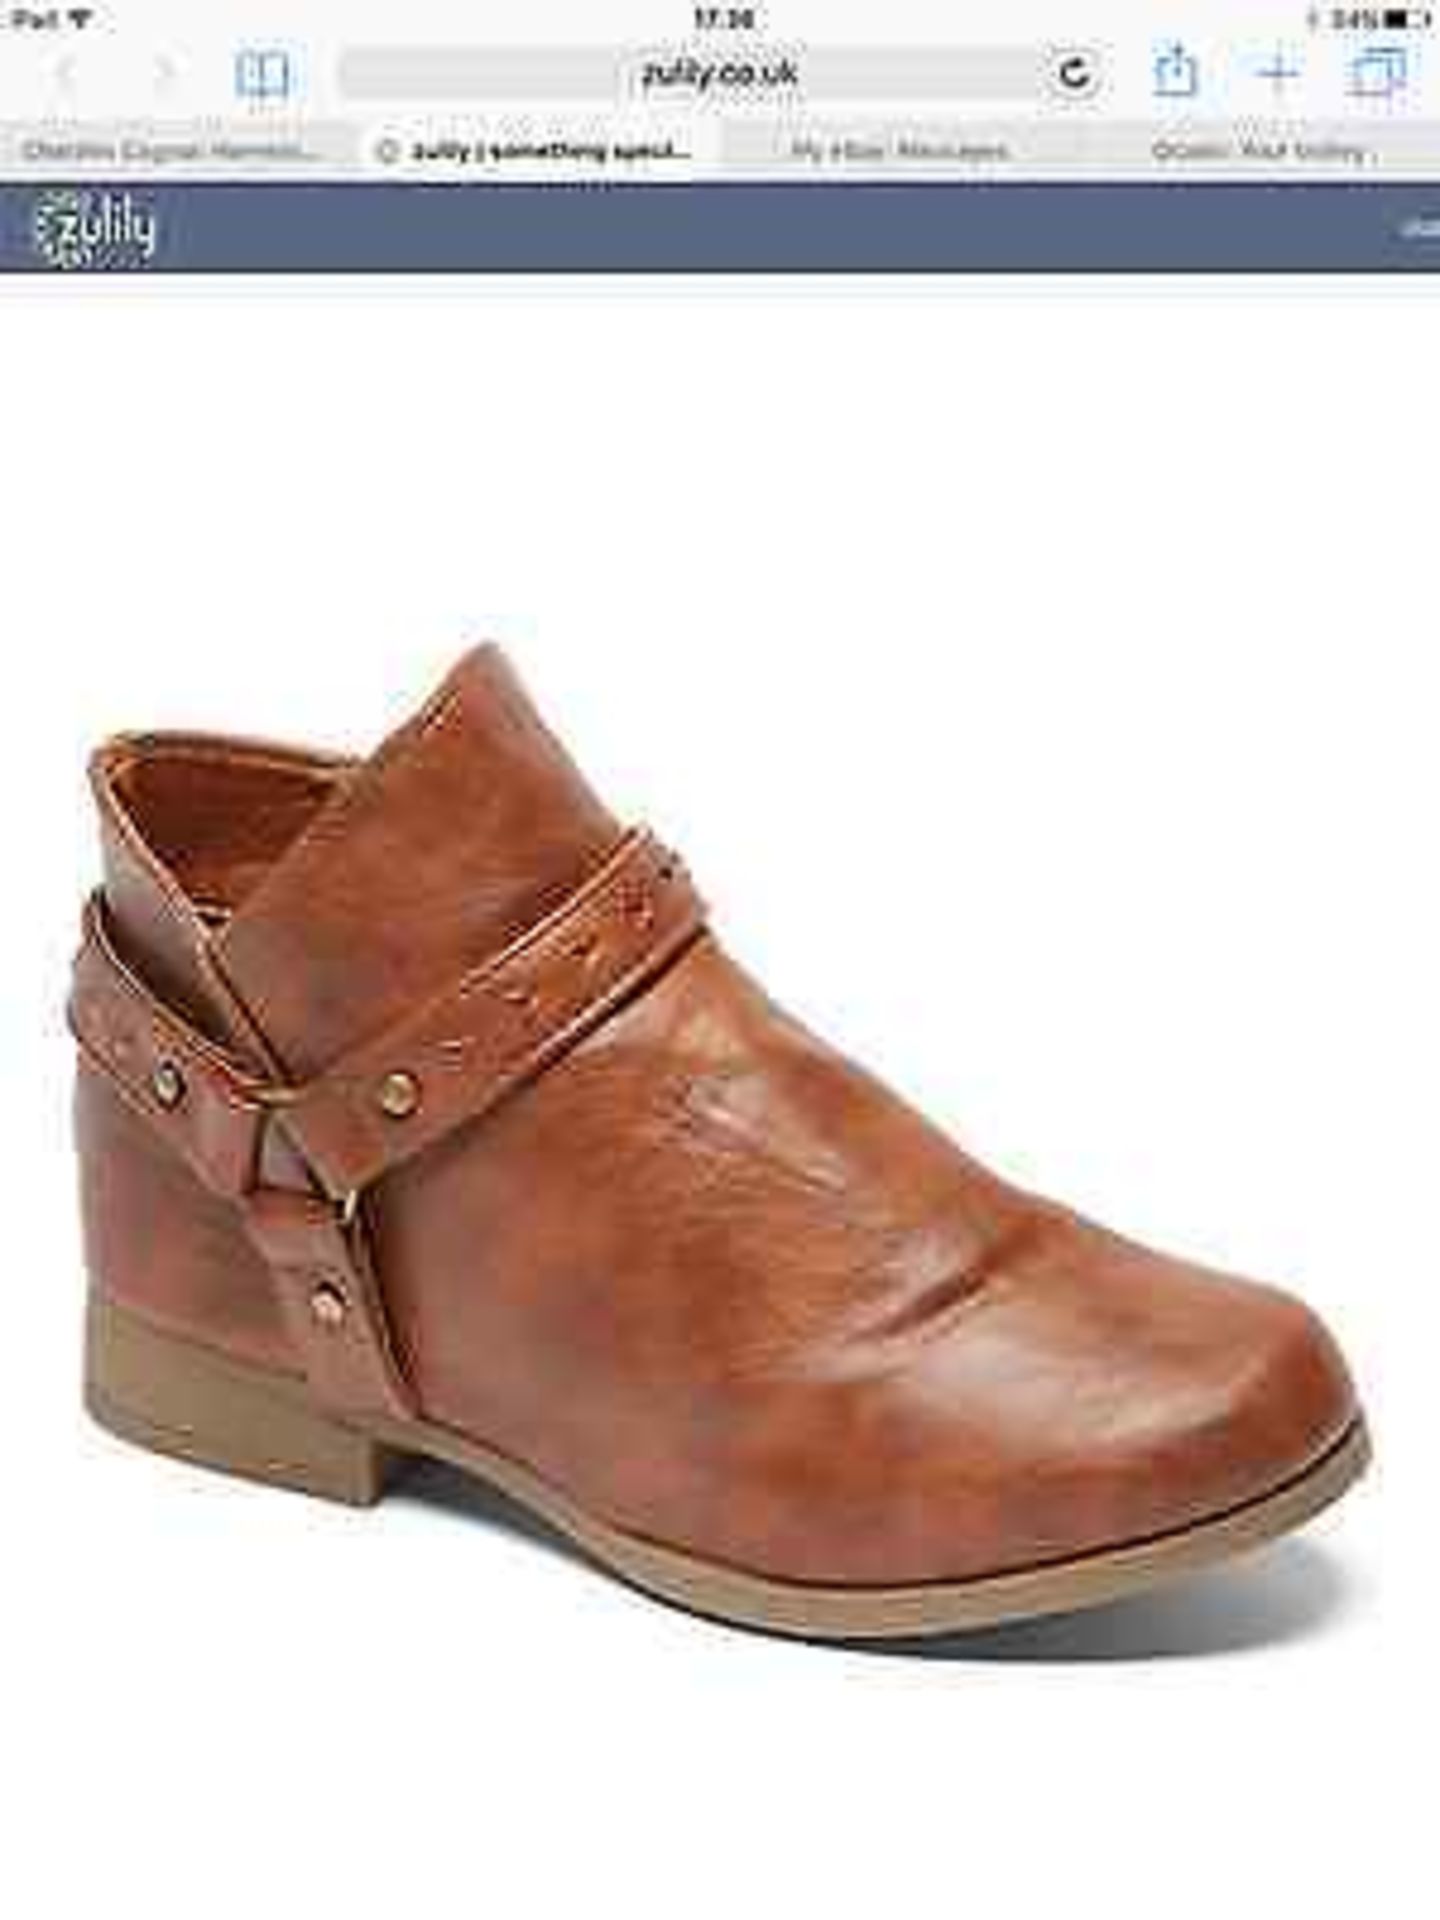 Chatties Cognac Harness Ankle Bootie, Size Eur 34, RRP £53.99 (New without box)